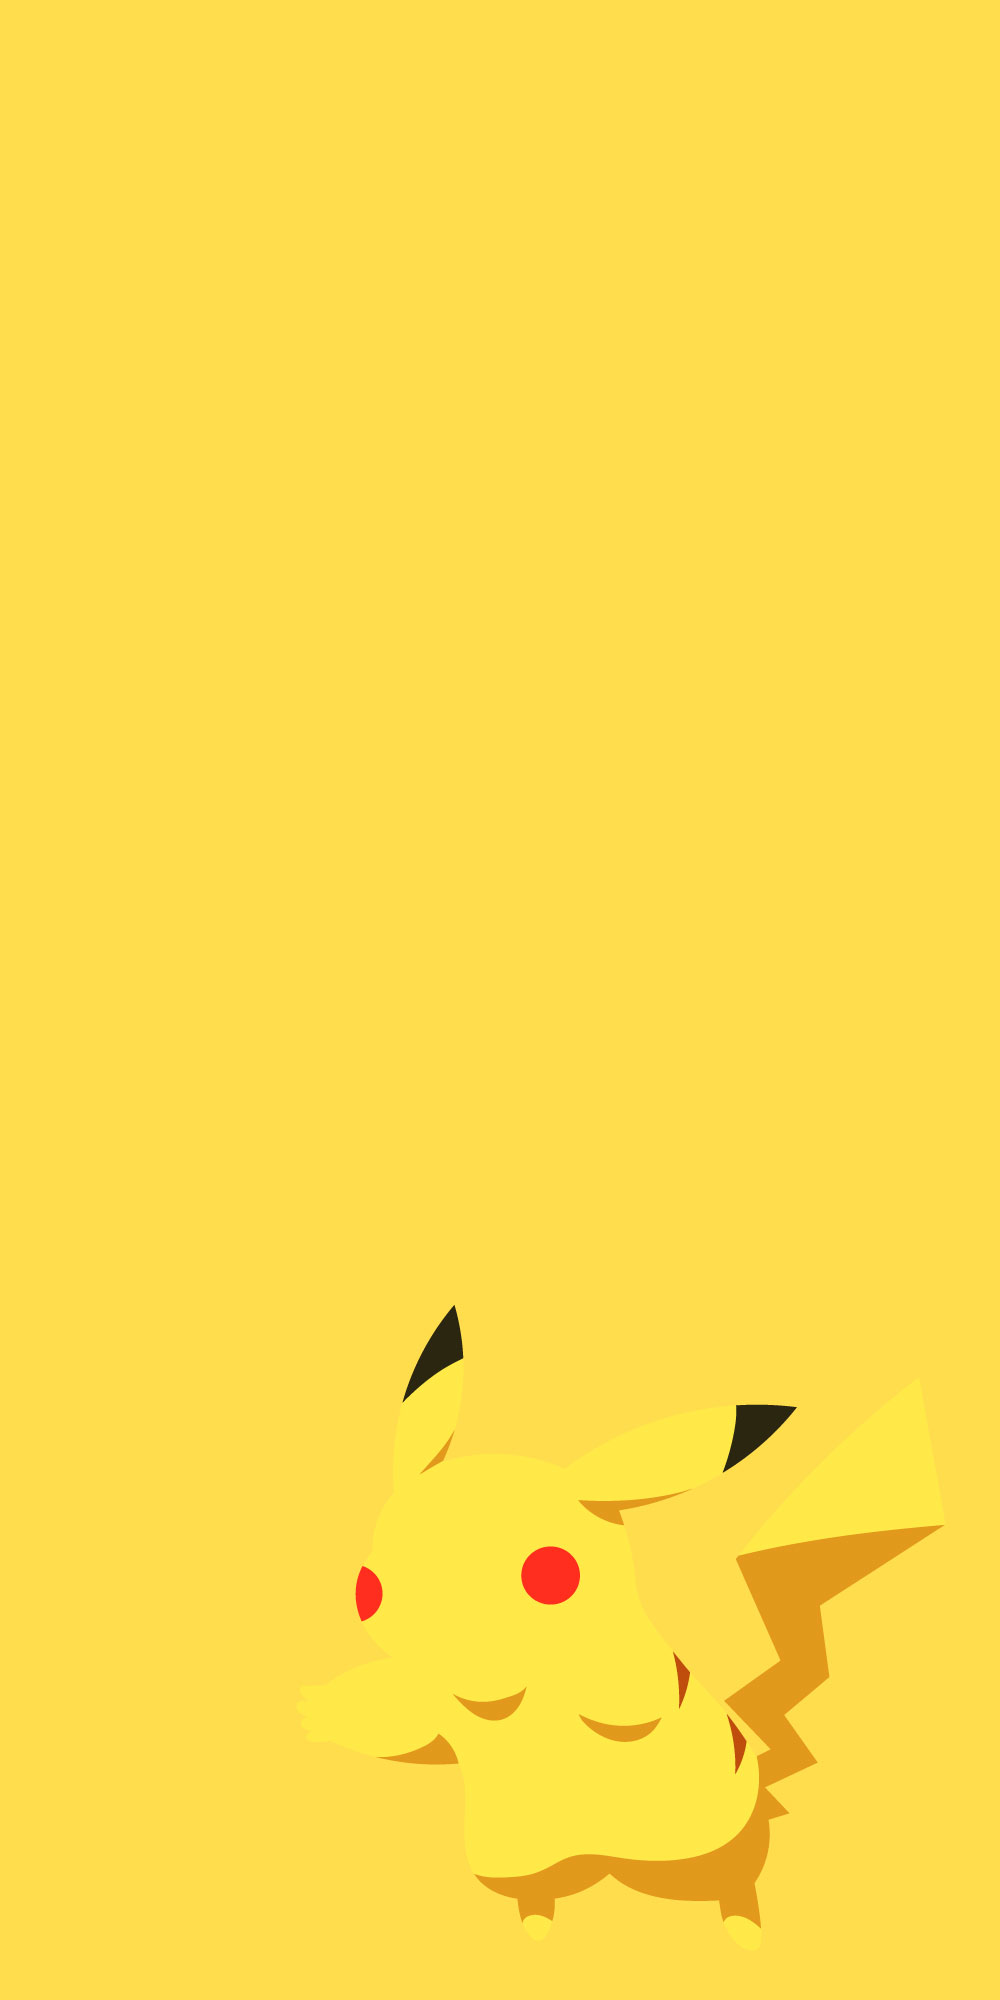 180 Tap image for more funny cute Pikachu wallpaper Pikachu  Android   iPhone HD Wallpaper Background Download png  jpg 2023